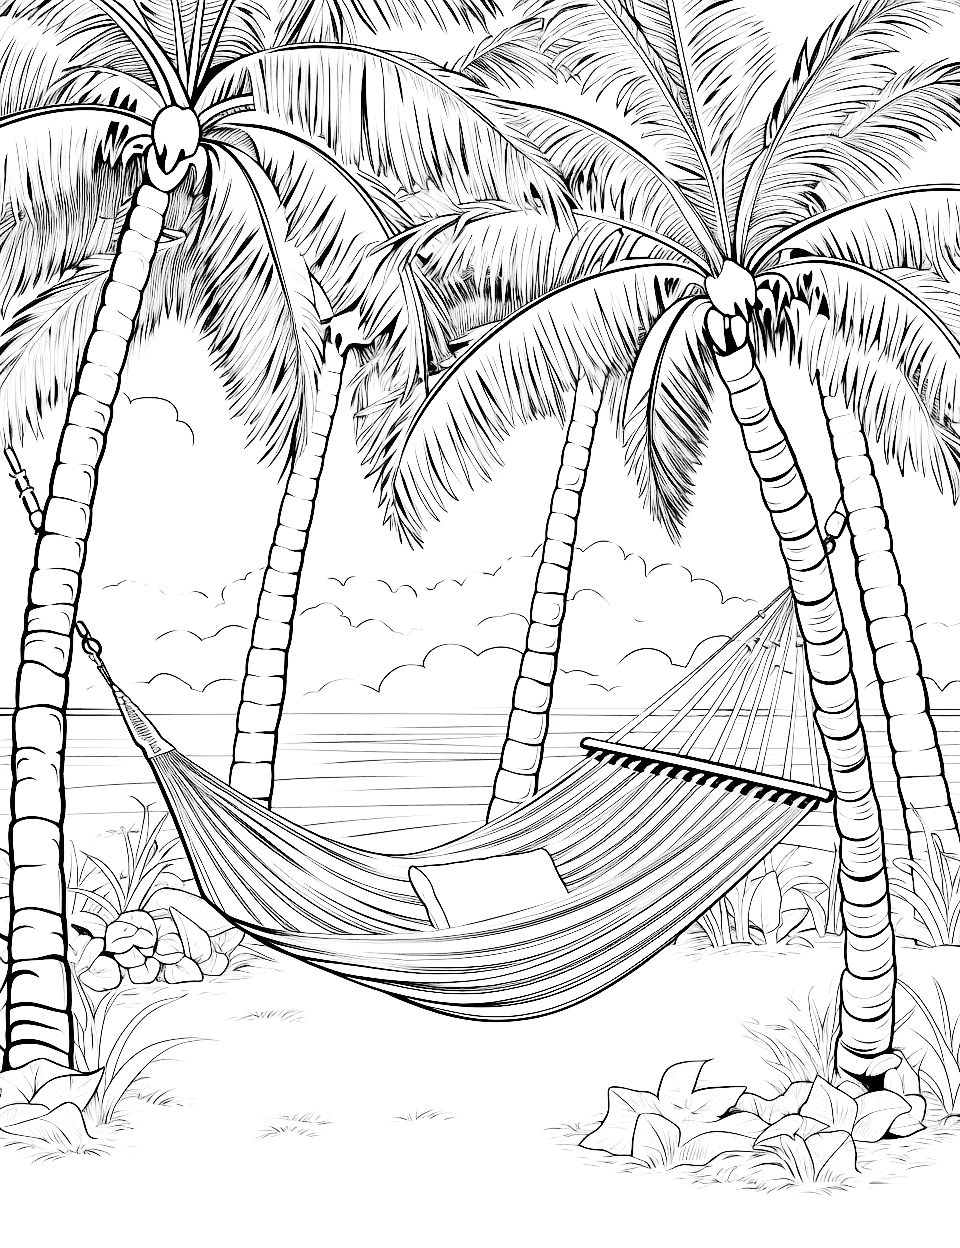 Tropical Oasis Adult Coloring Page - A hammock strung between two palm trees.